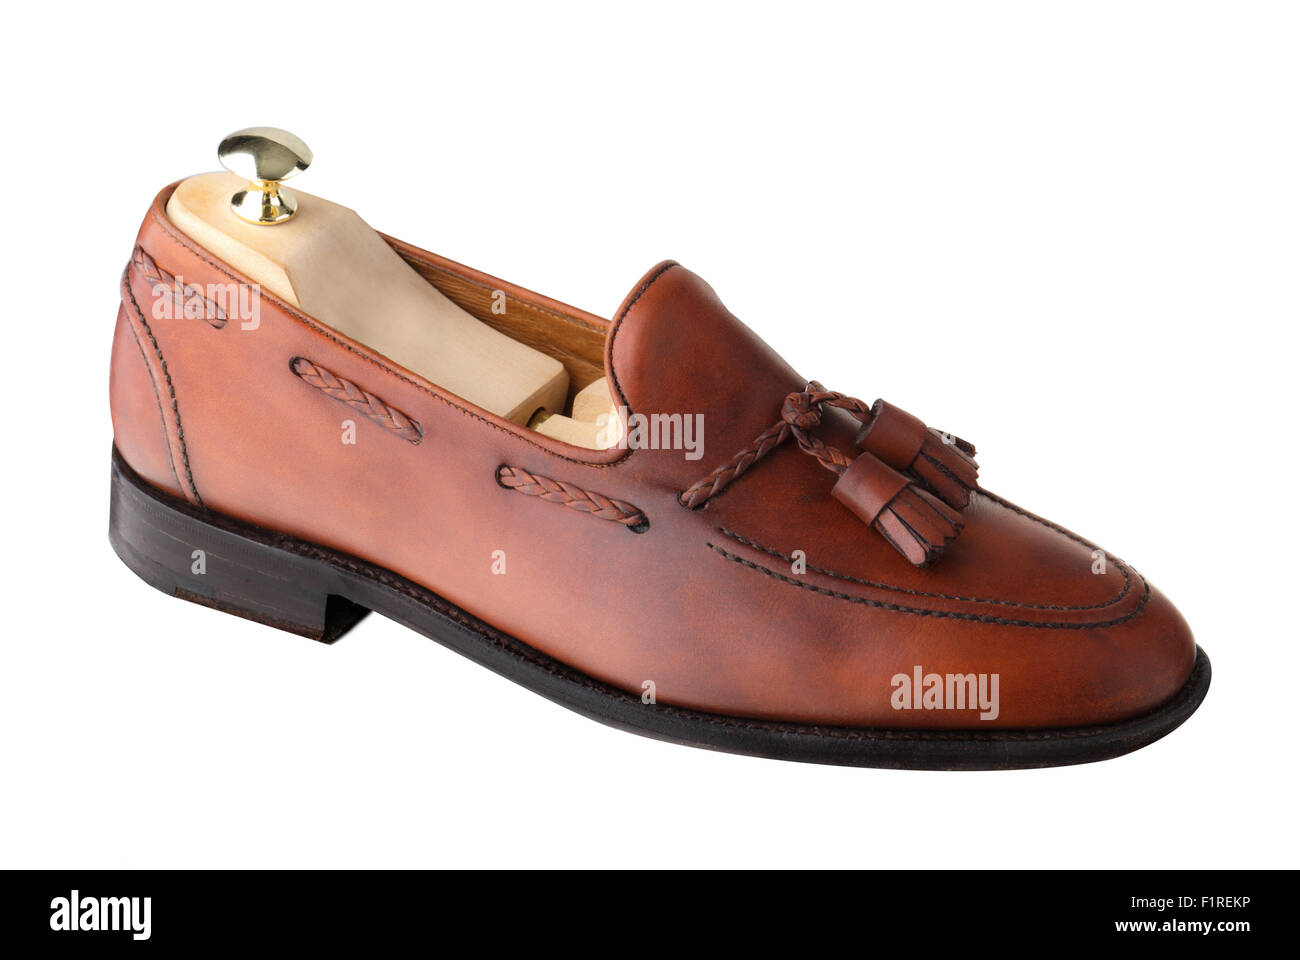 Almost unworn, single tasseled, handcrafted men's loafer with shoe tree inserted.  The upper is dark leaf calf. Stock Photo